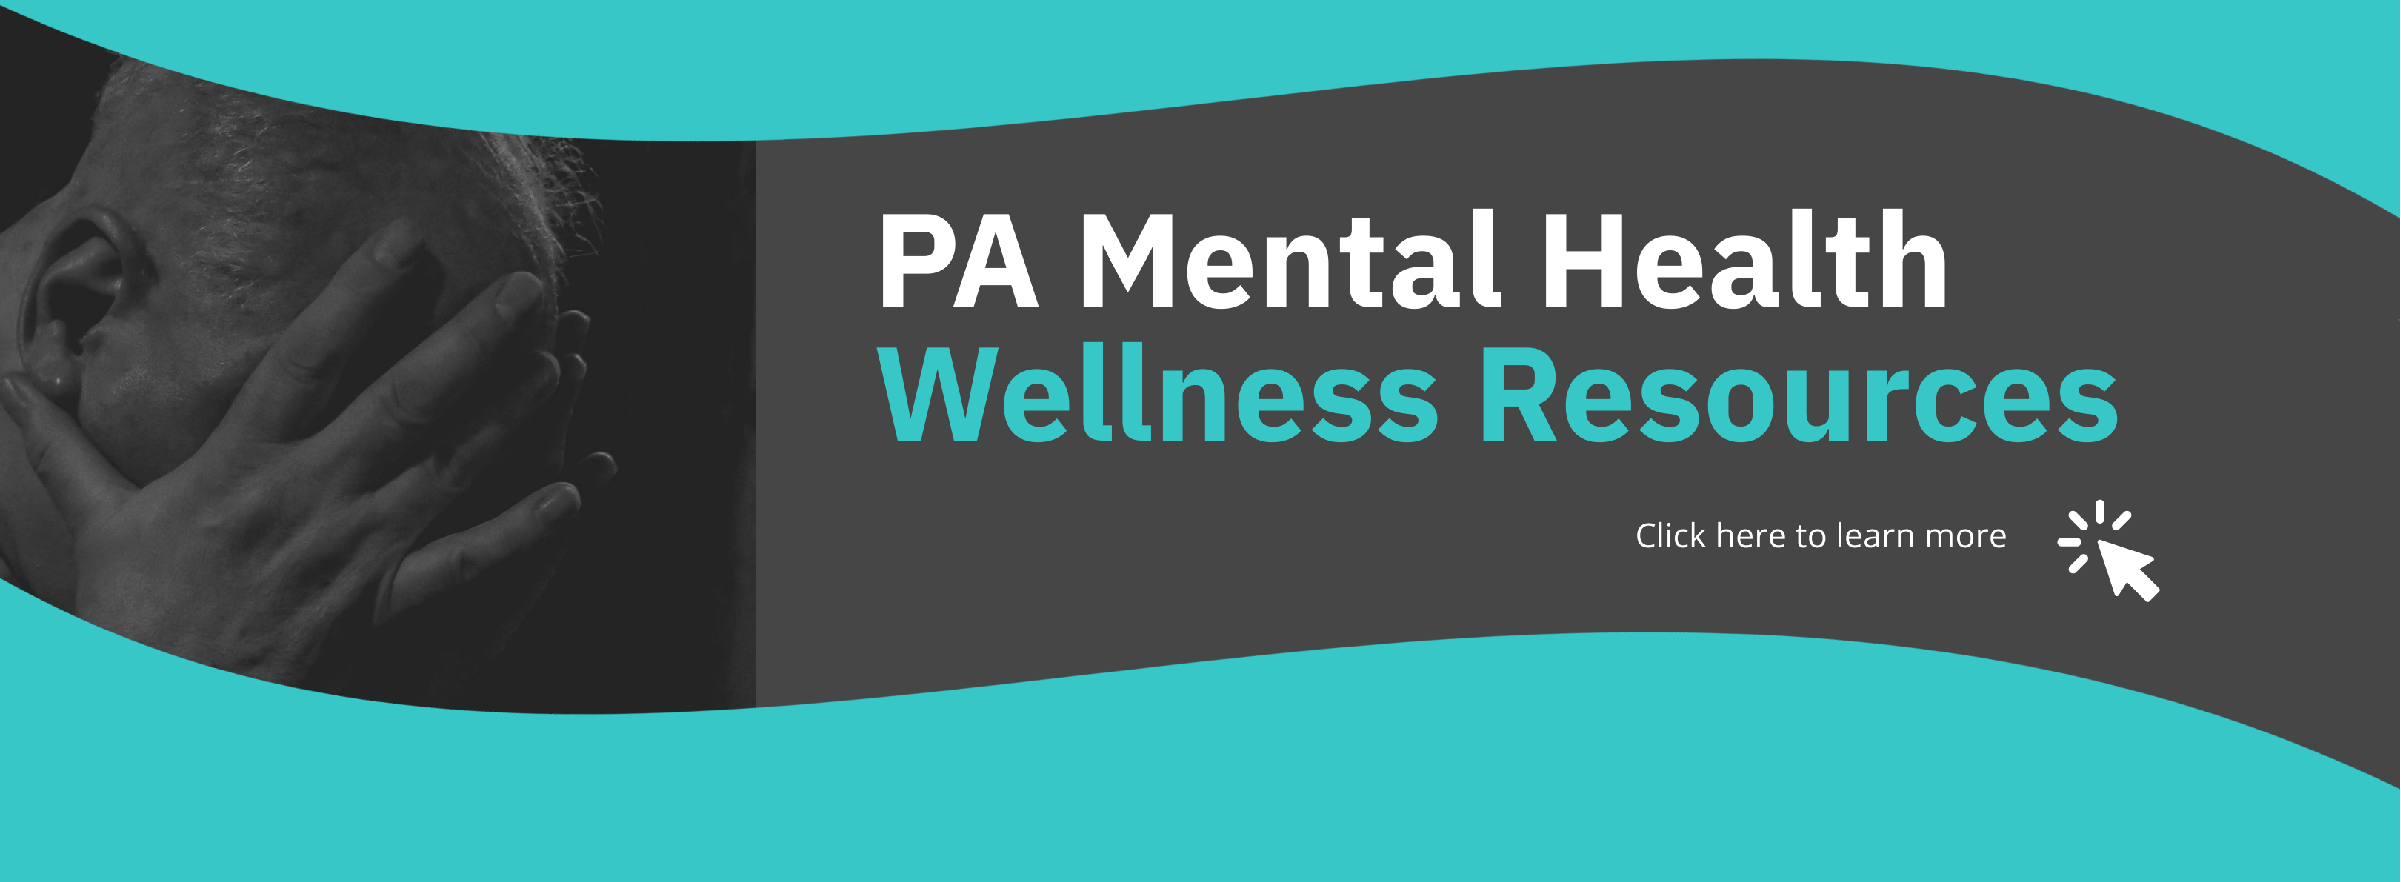 PA Mental Health Resources